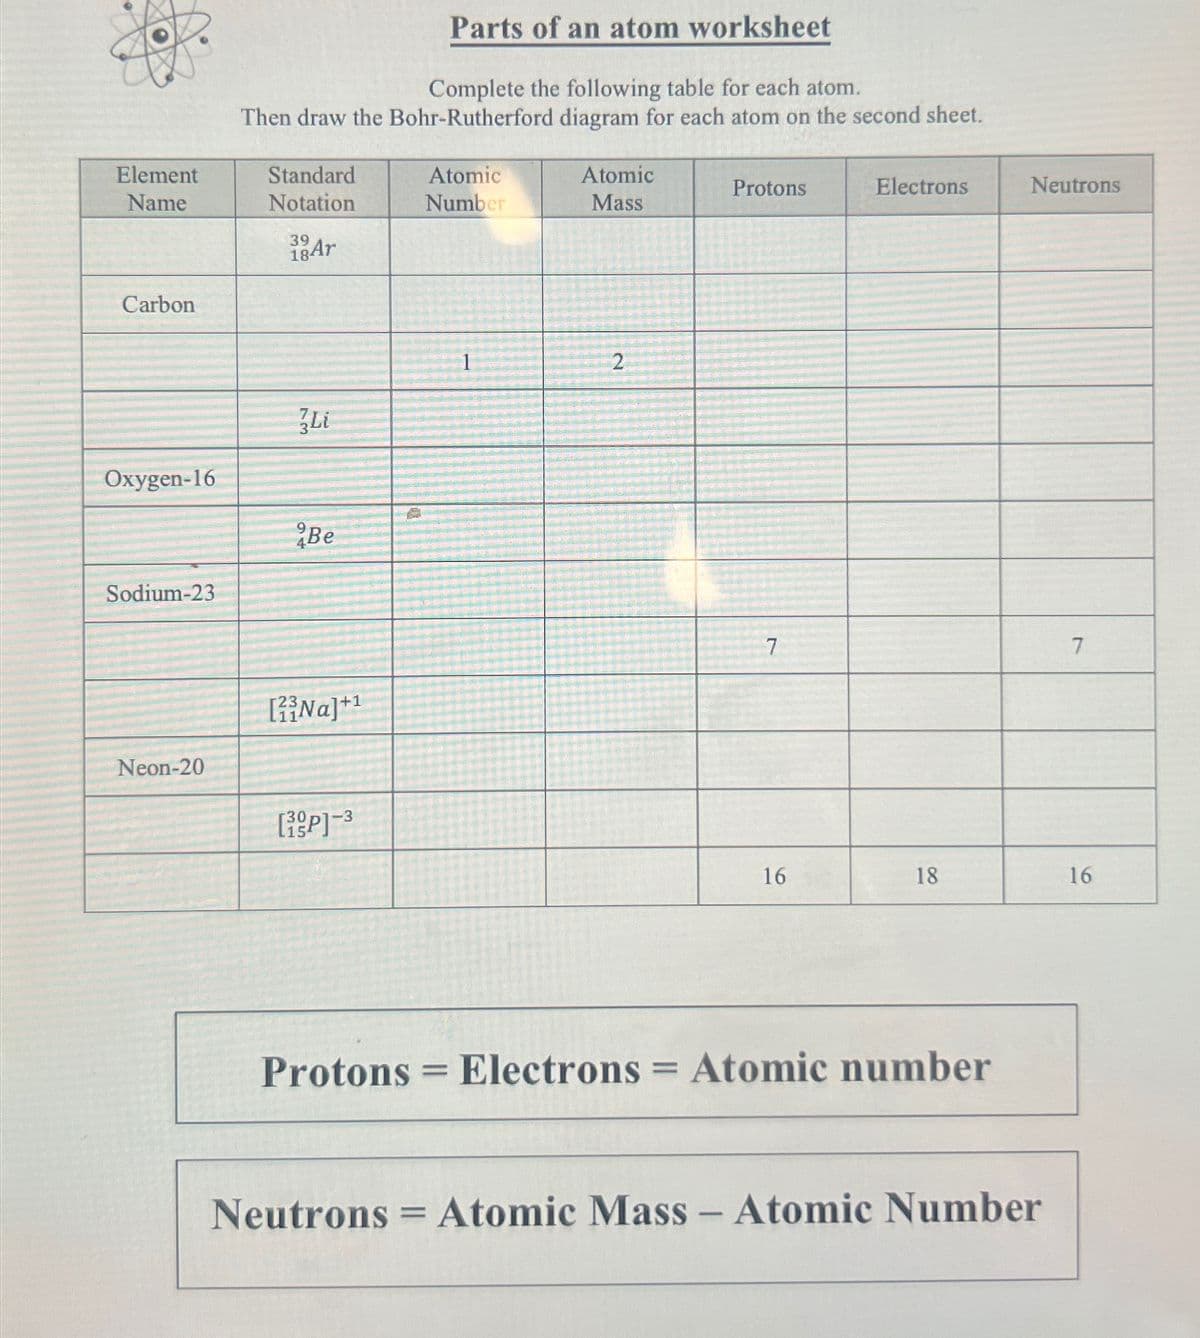 Parts of an atom worksheet
Complete the following table for each atom.
Then draw the Bohr-Rutherford diagram for each atom on the second sheet.
Element
Name
Standard
Notation
Atomic
Number
Atomic
Mass
Protons
39 Ar
Carbon
Li
Oxygen-16
Sodium-23
Be
Neon-20
[Na] +1
[39]-³
2
Electrons
Neutrons
7
7
16
18
16
Protons = Electrons = Atomic number
NeutronsAtomic Mass - Atomic Number